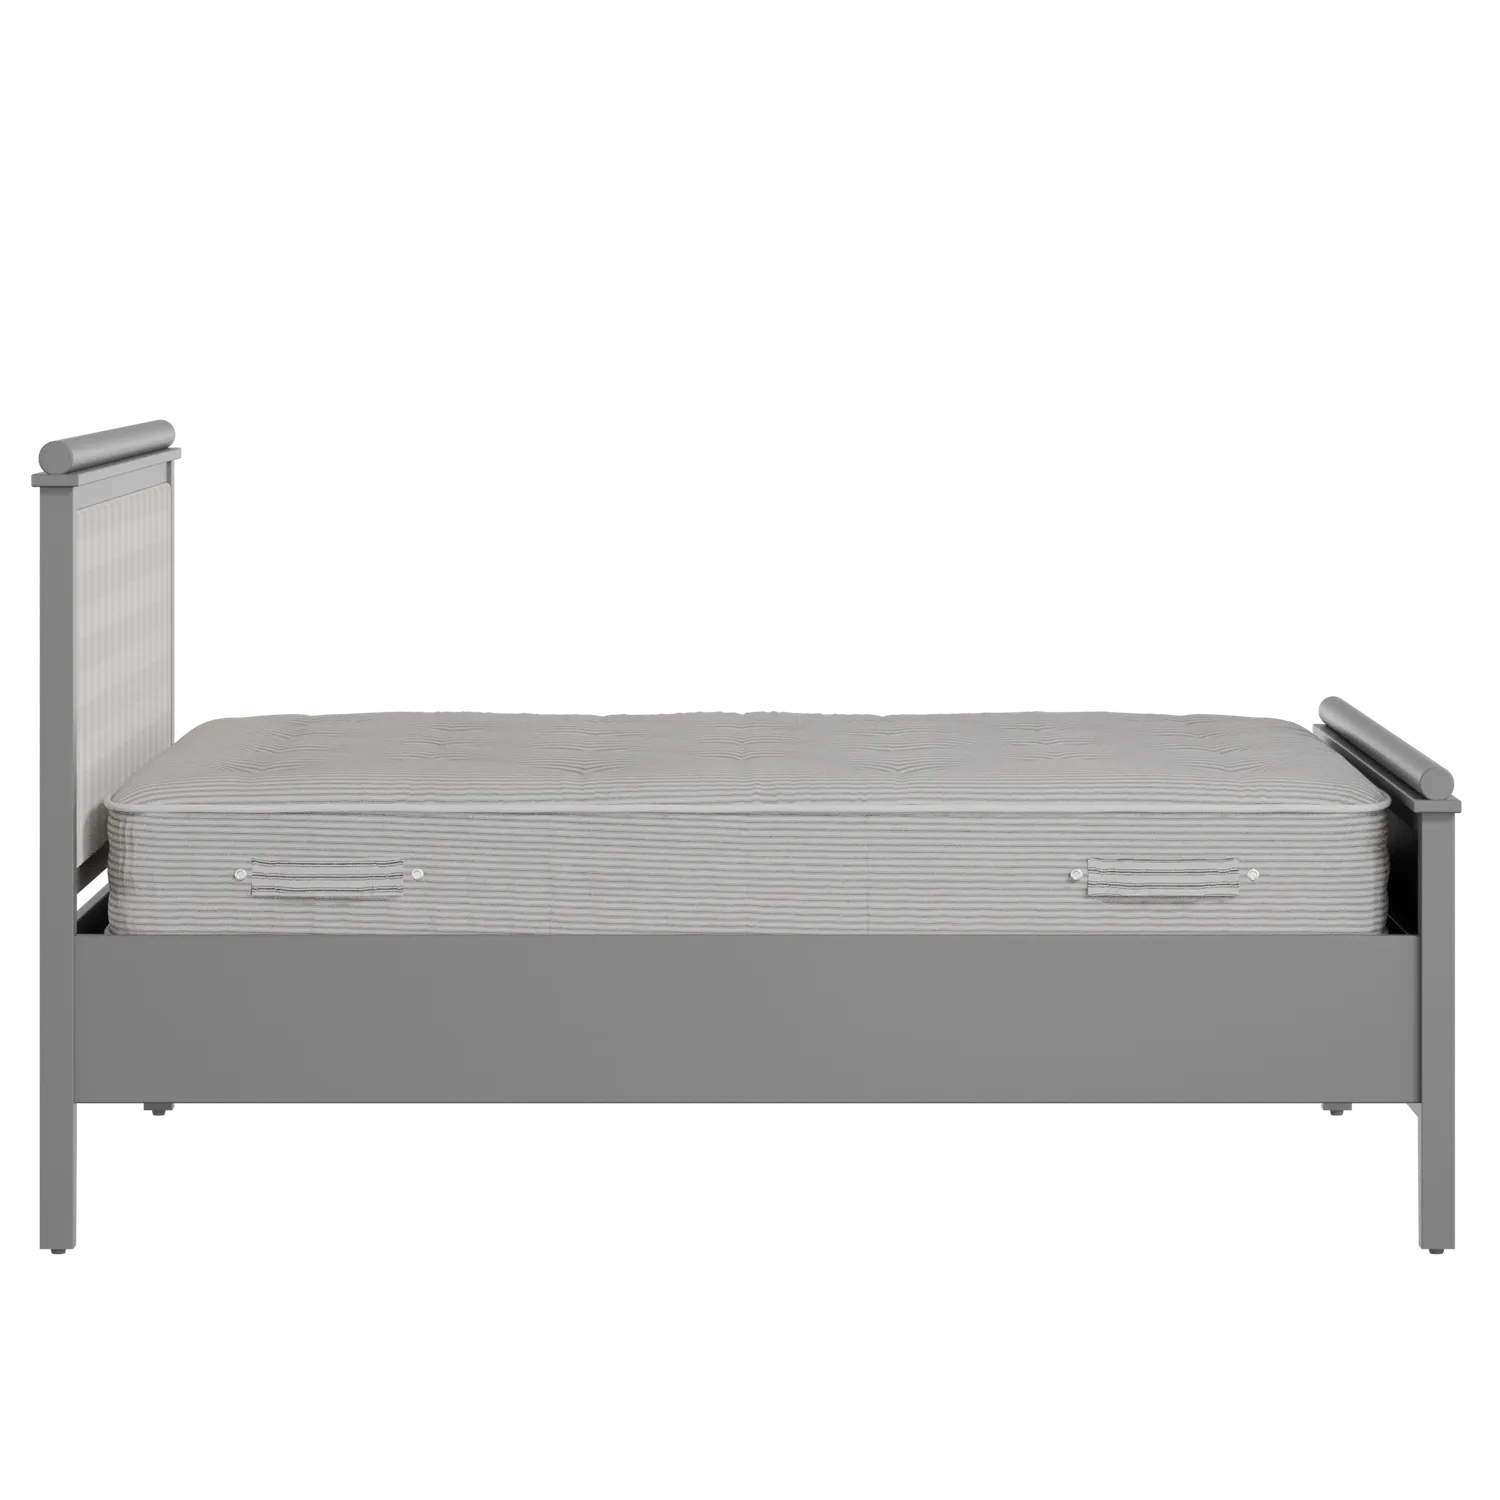 Nocturne Upholstered wood upholstered bed in grey with Romo Kemble Putty fabric